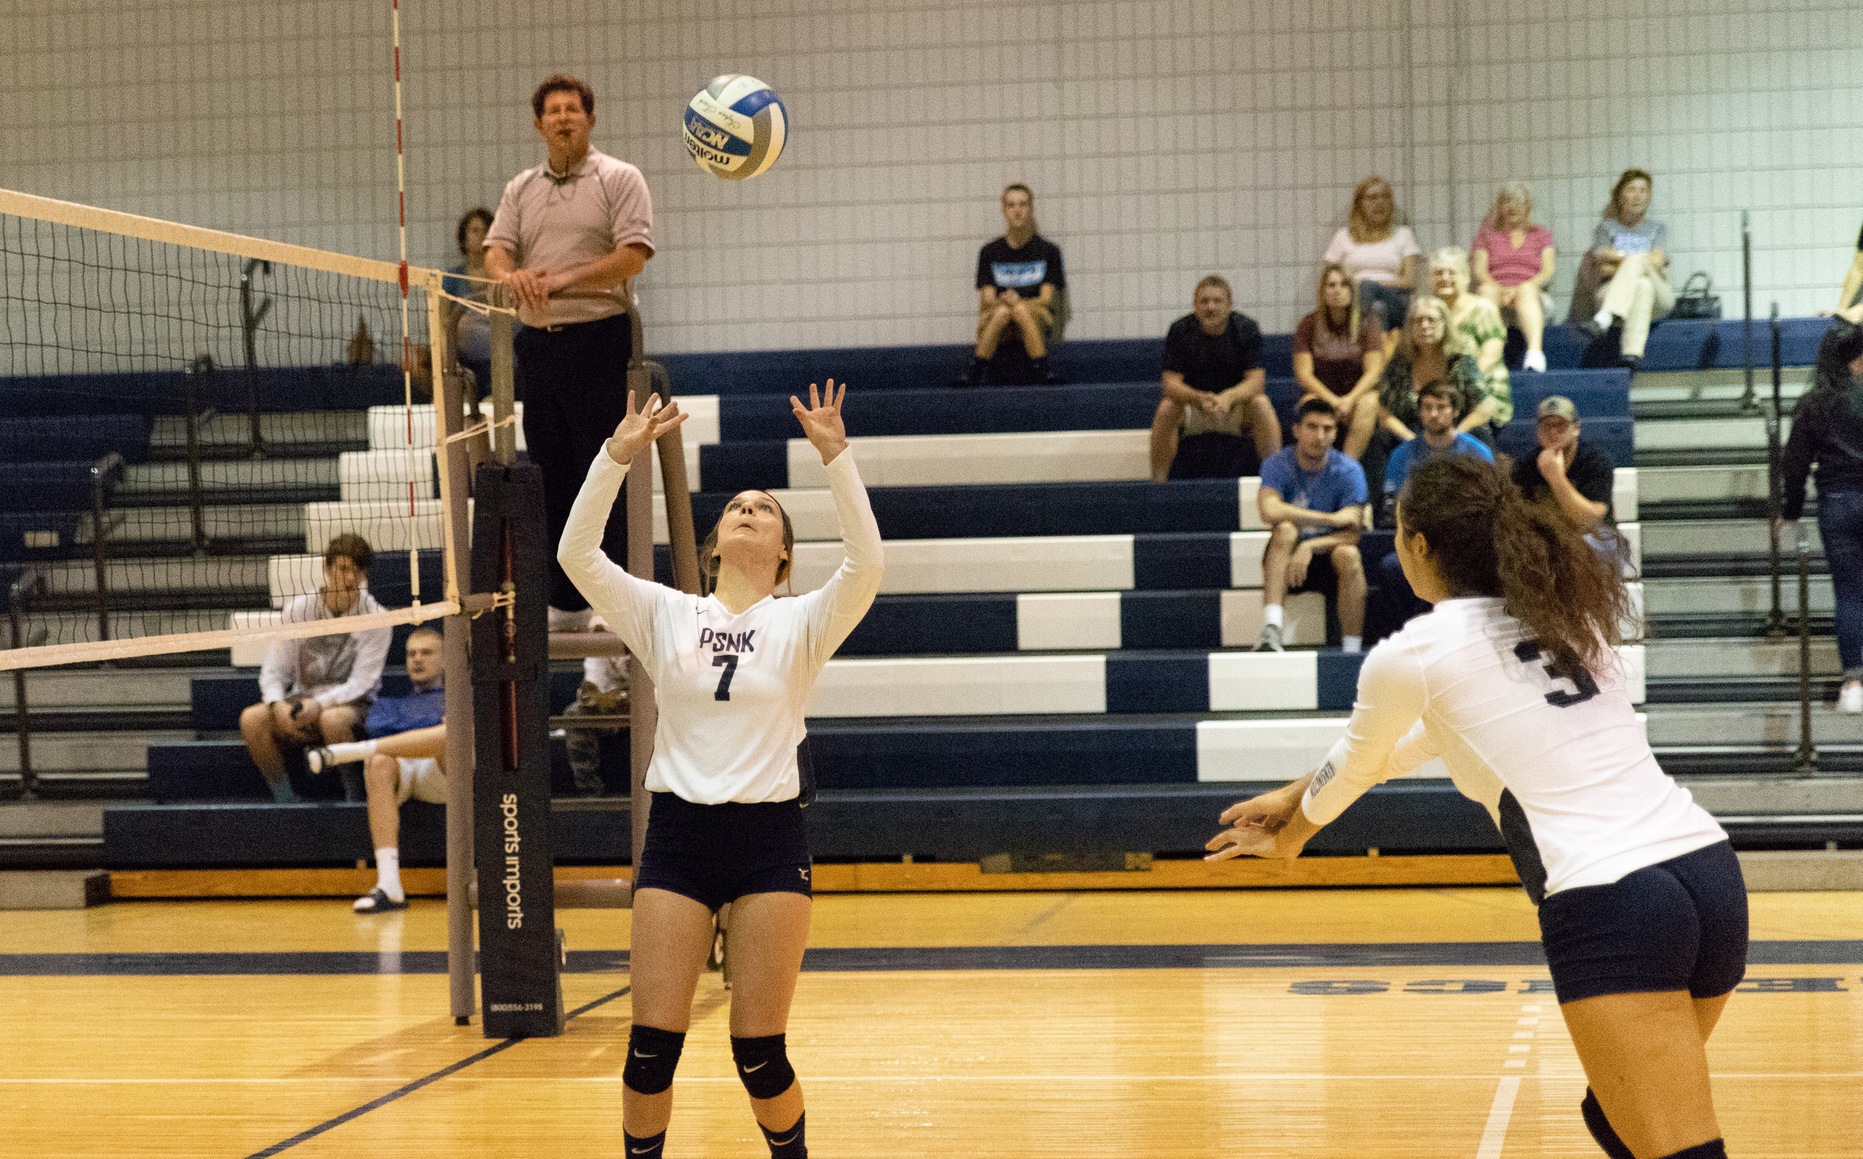 New Kensington falls to Beaver in PSUAC volleyball action